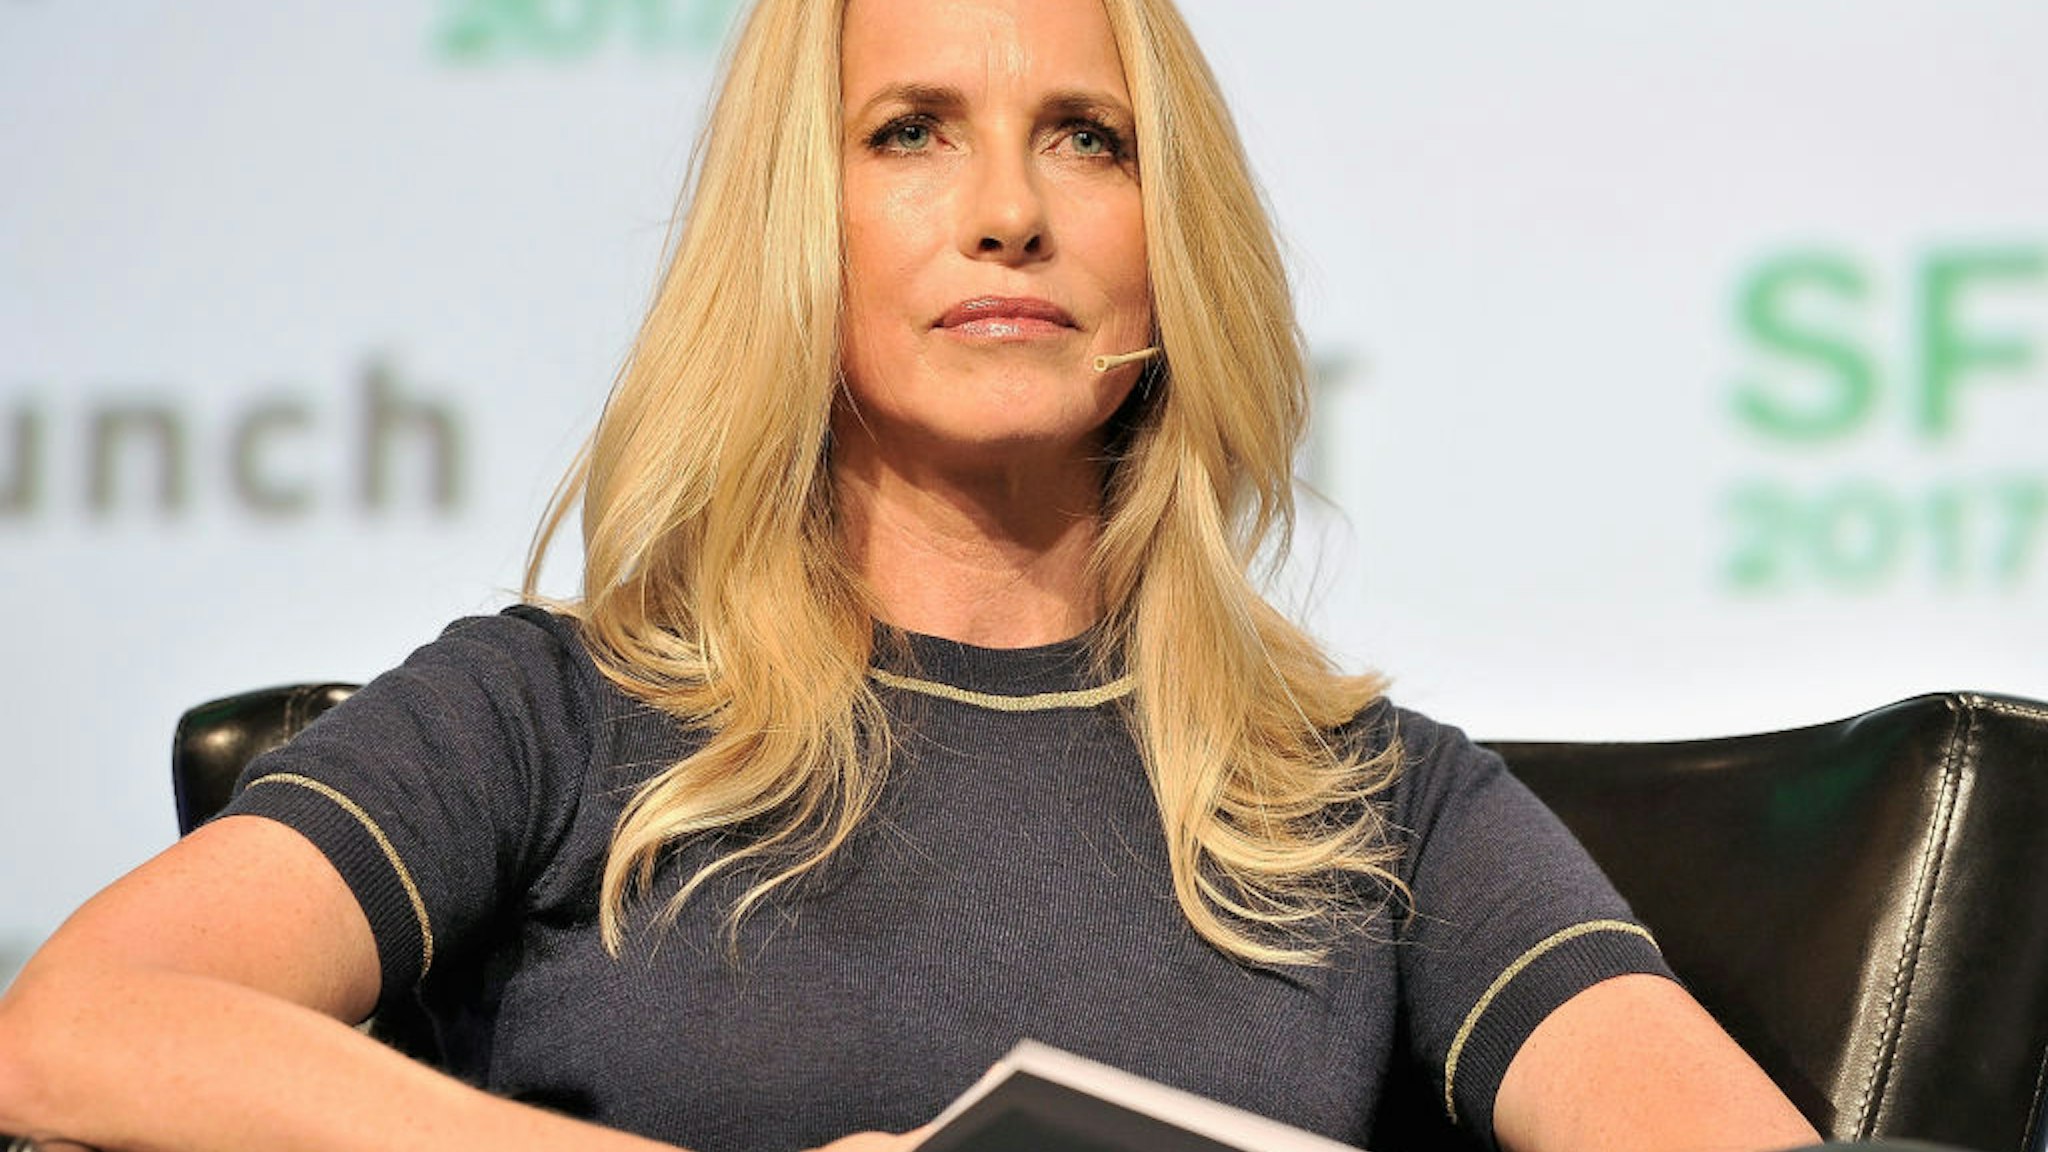 Emerson Collective Founder and President Laurene Powell Jobs speaks onstage during TechCrunch Disrupt SF 2017 at Pier 48 on September 20, 2017 in San Francisco, California.